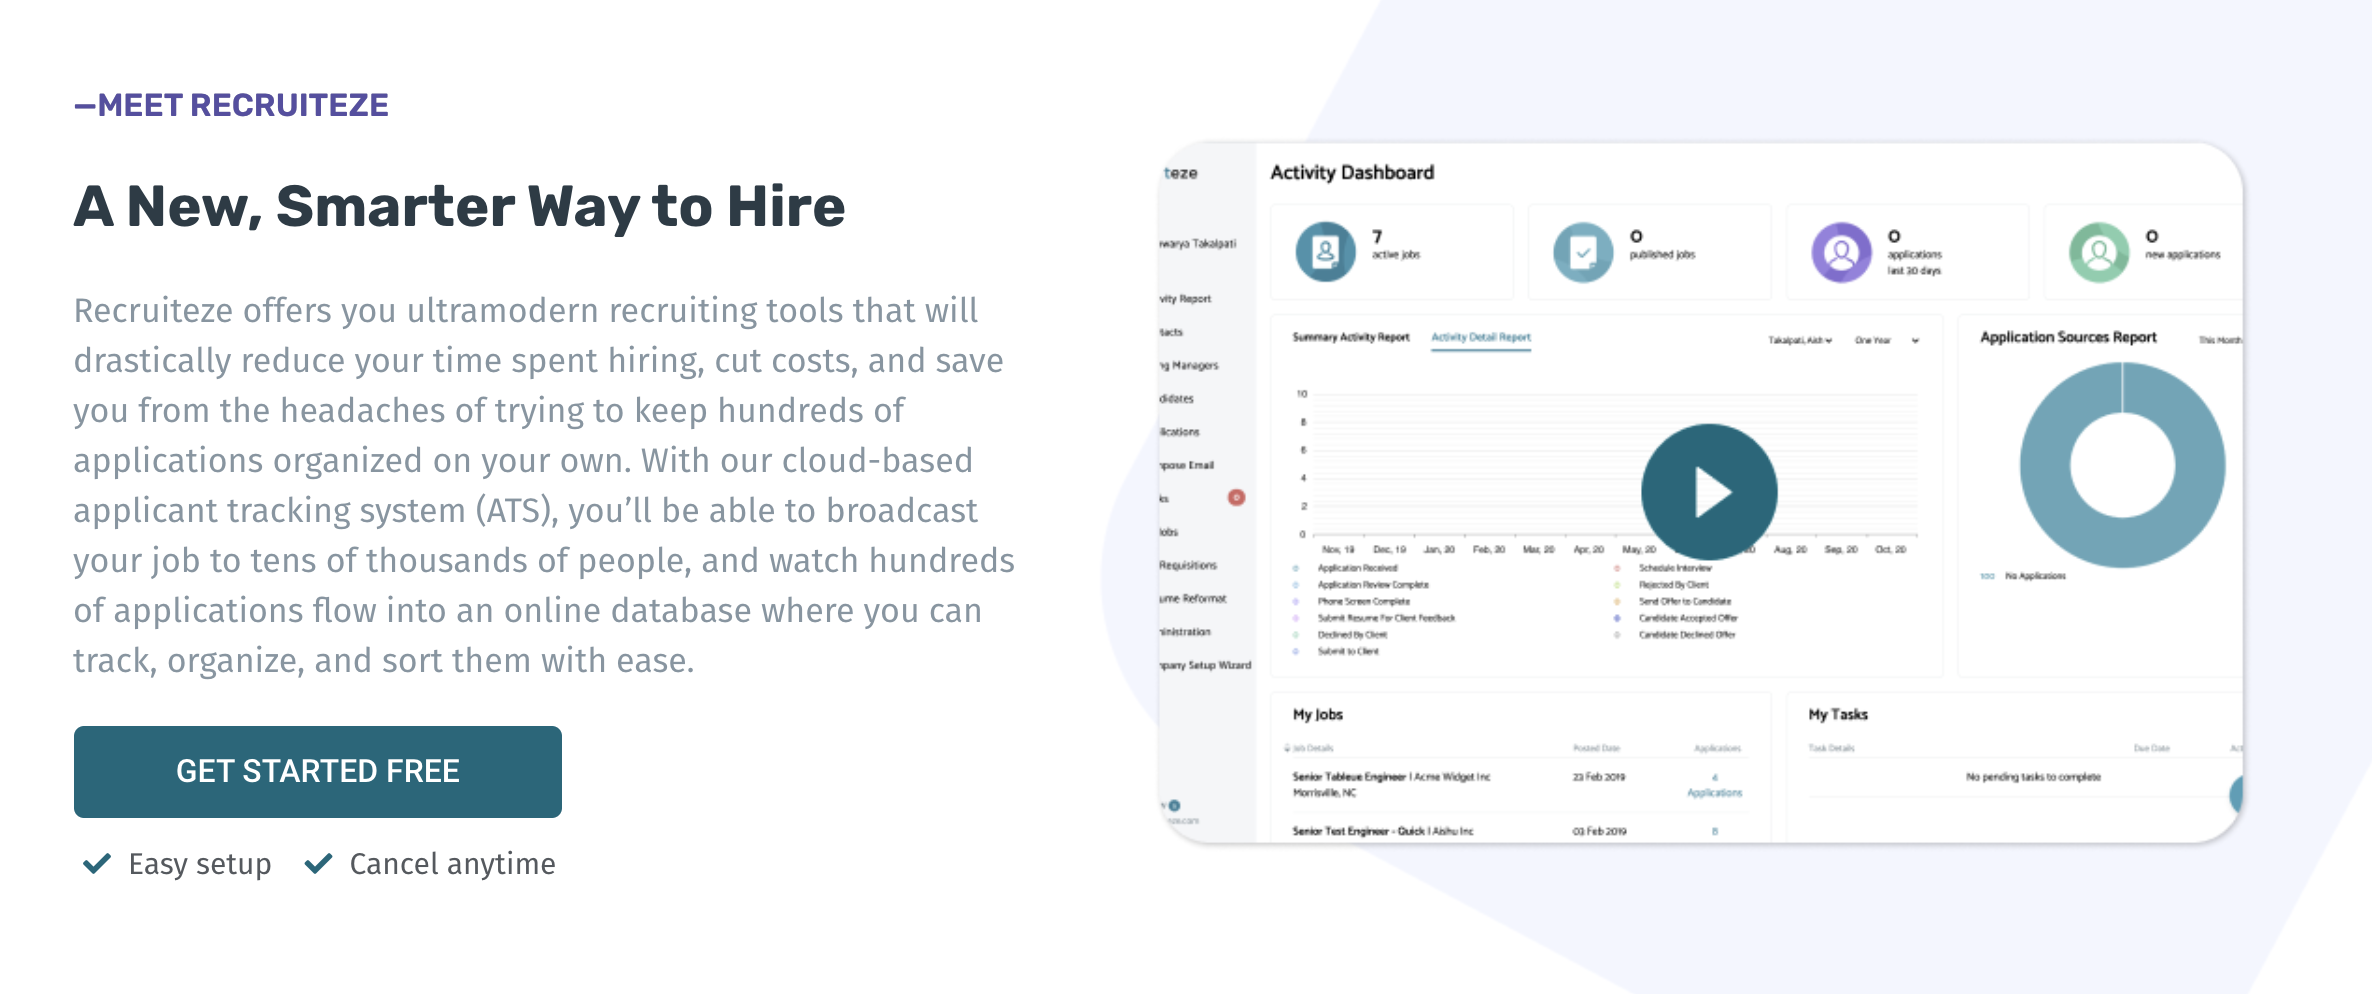 Free Online Applicant Tracking System - benefits (Recruiteze)